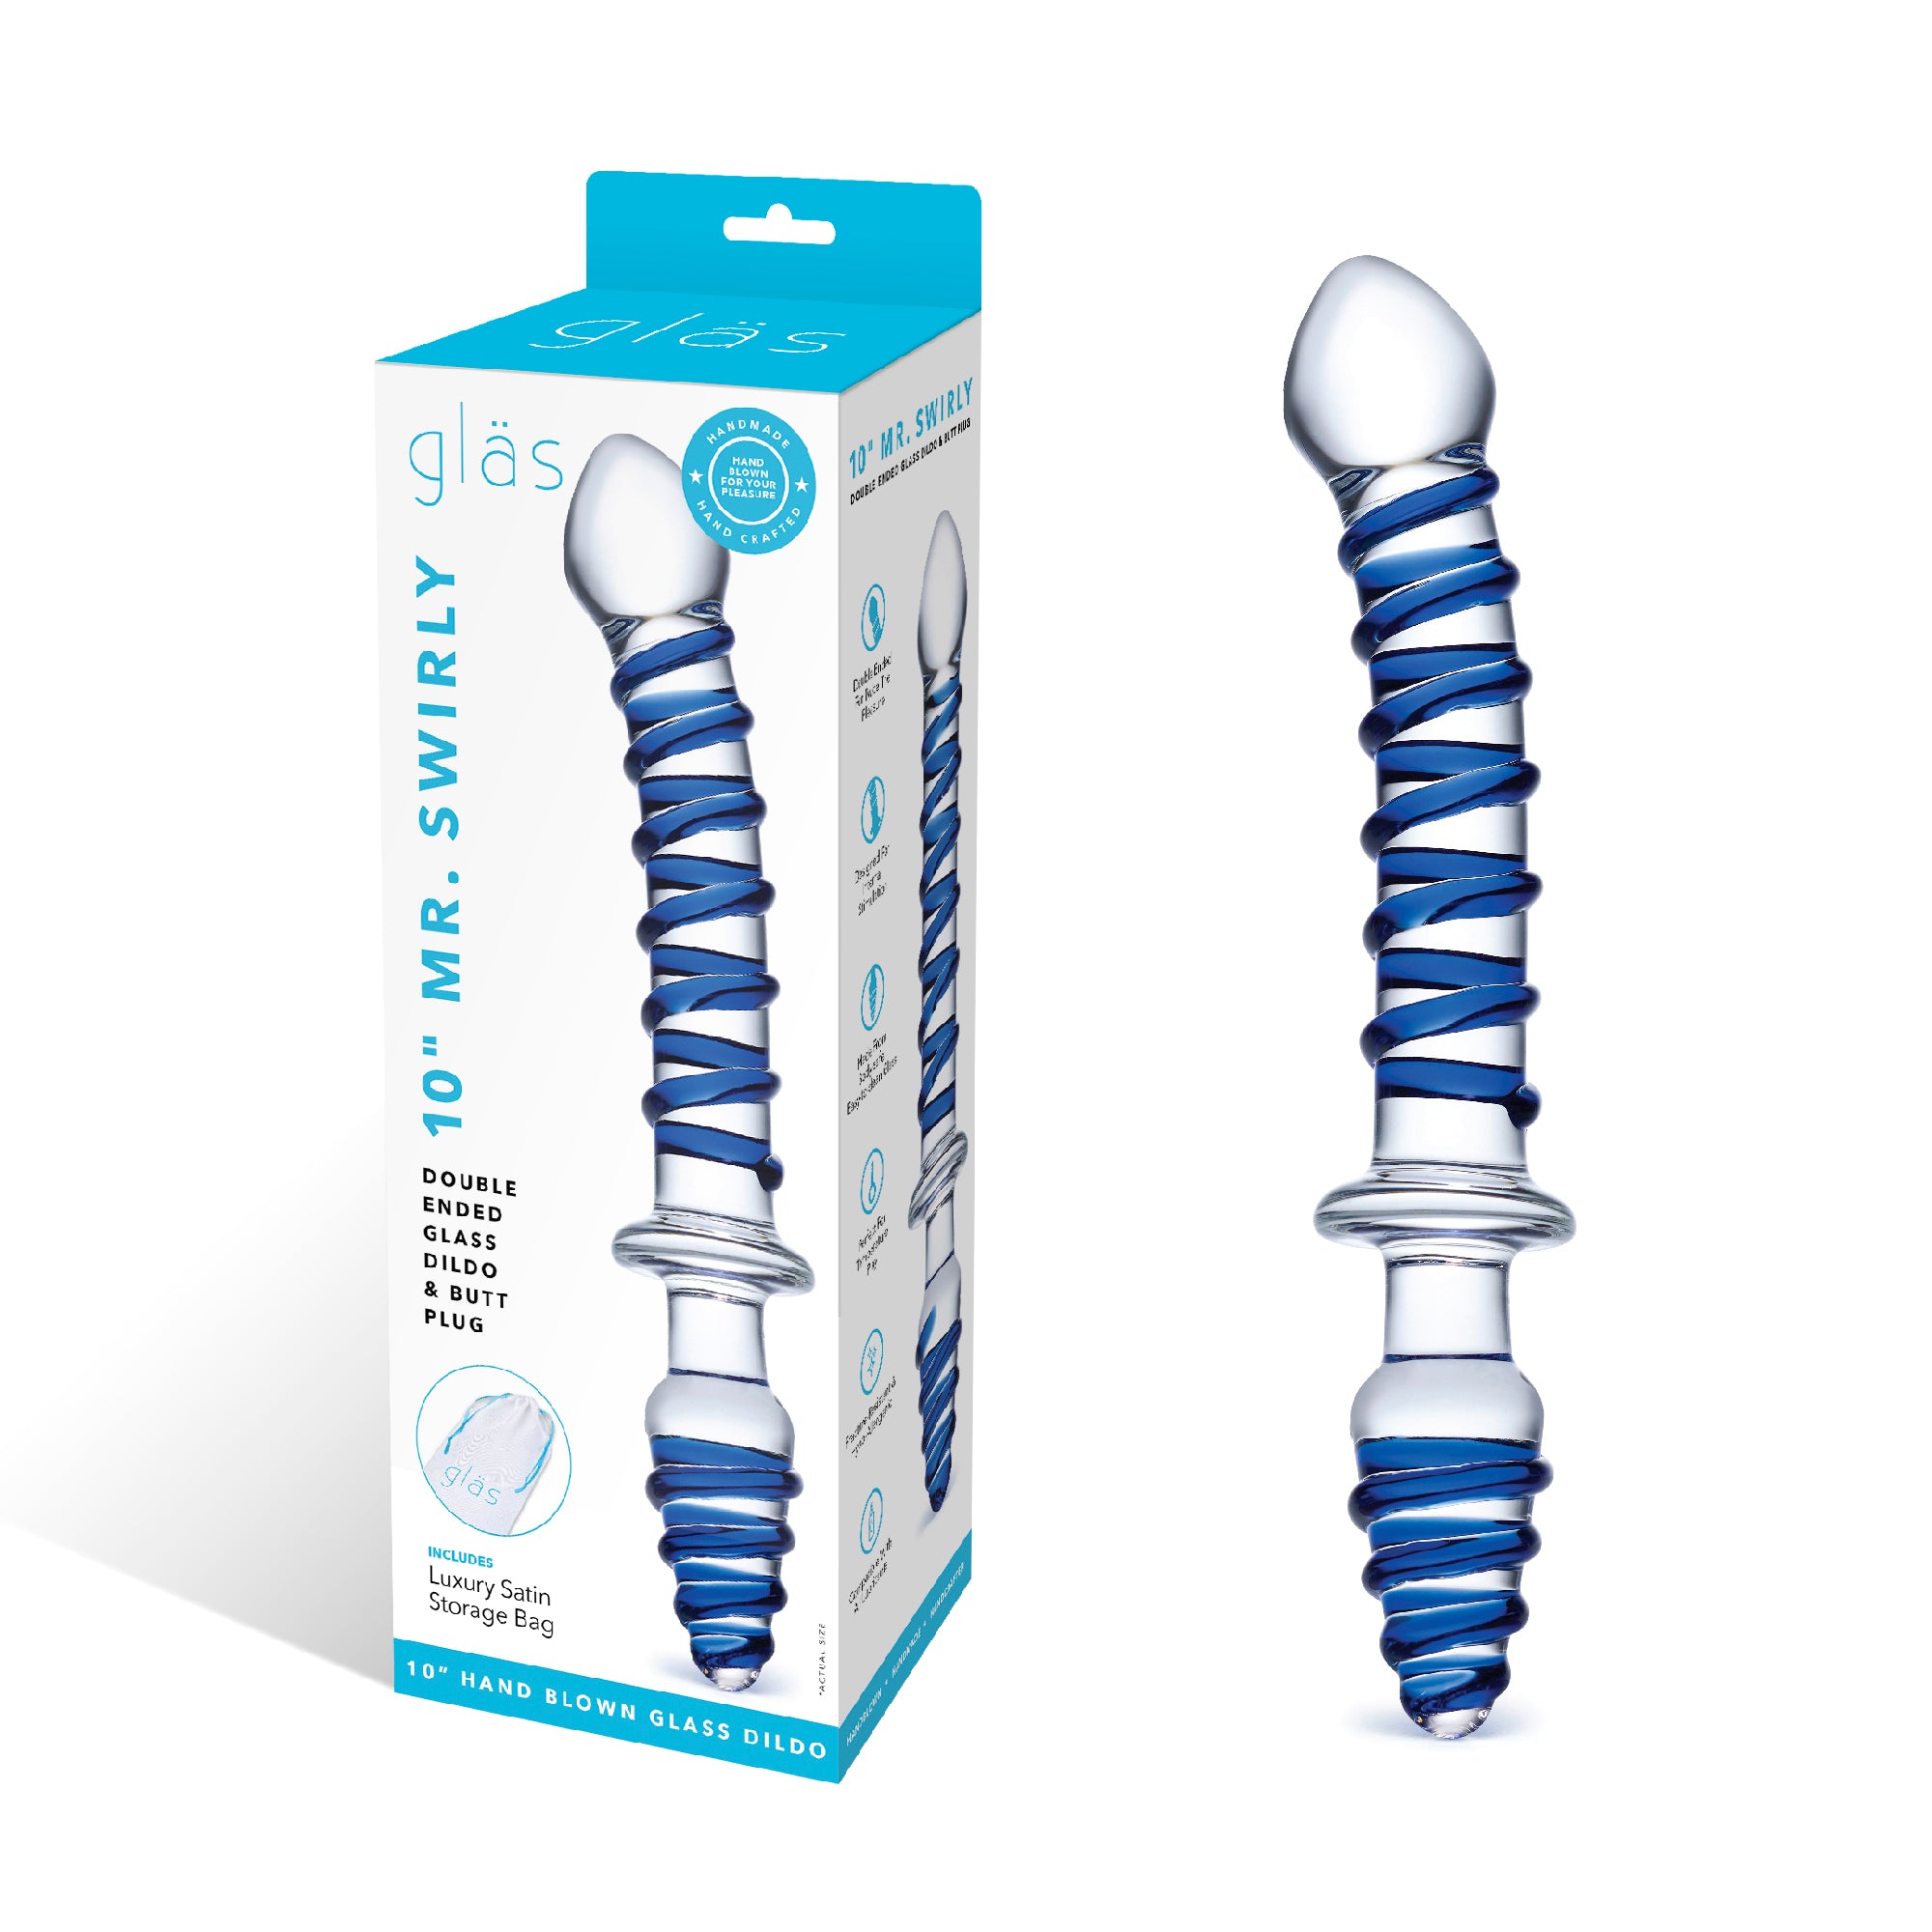 Packaging of the Gläs 10 inch Mr. Swirly Double Ended Glass Dildo and Butt Plug